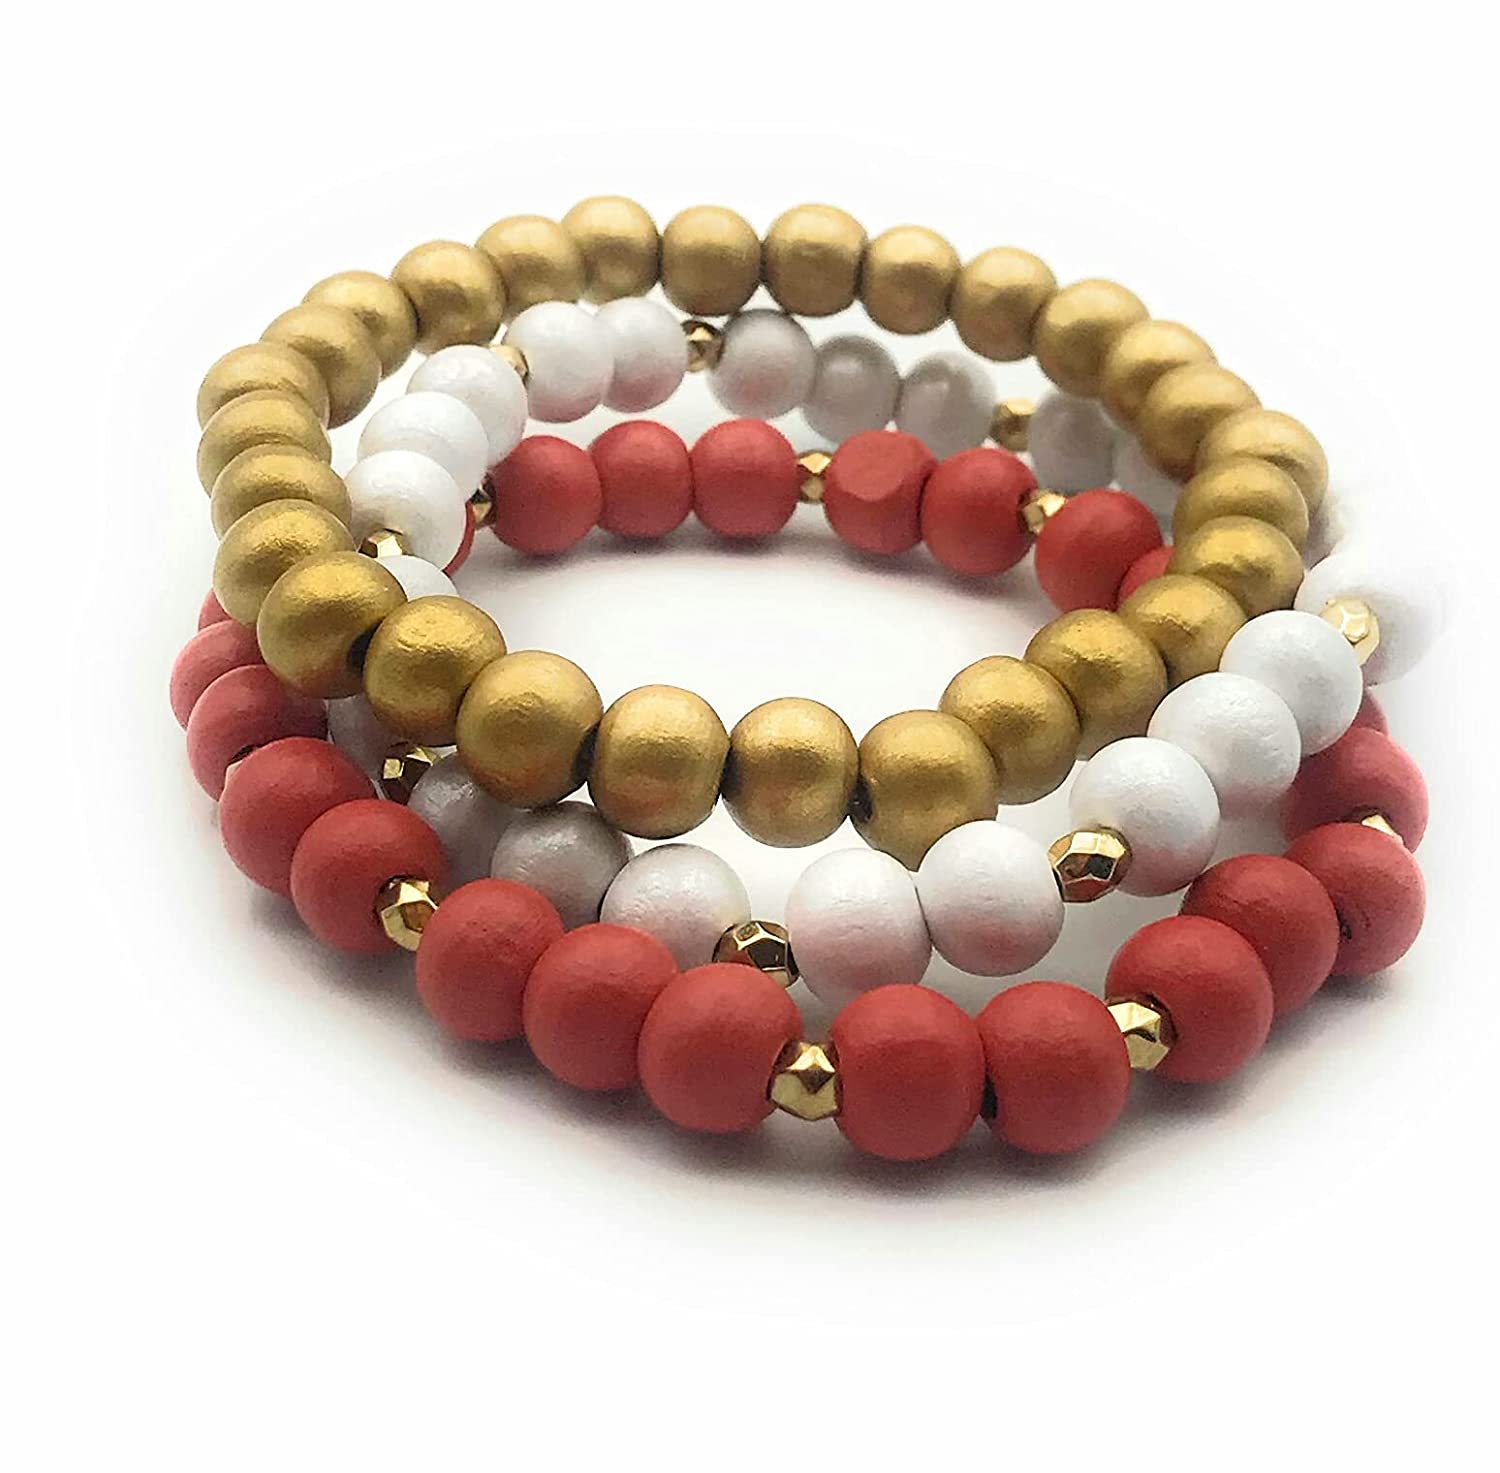 Set of 3 Wood Bead Stretch Bracelets Stacked Up from Scott D Jewelry Designs